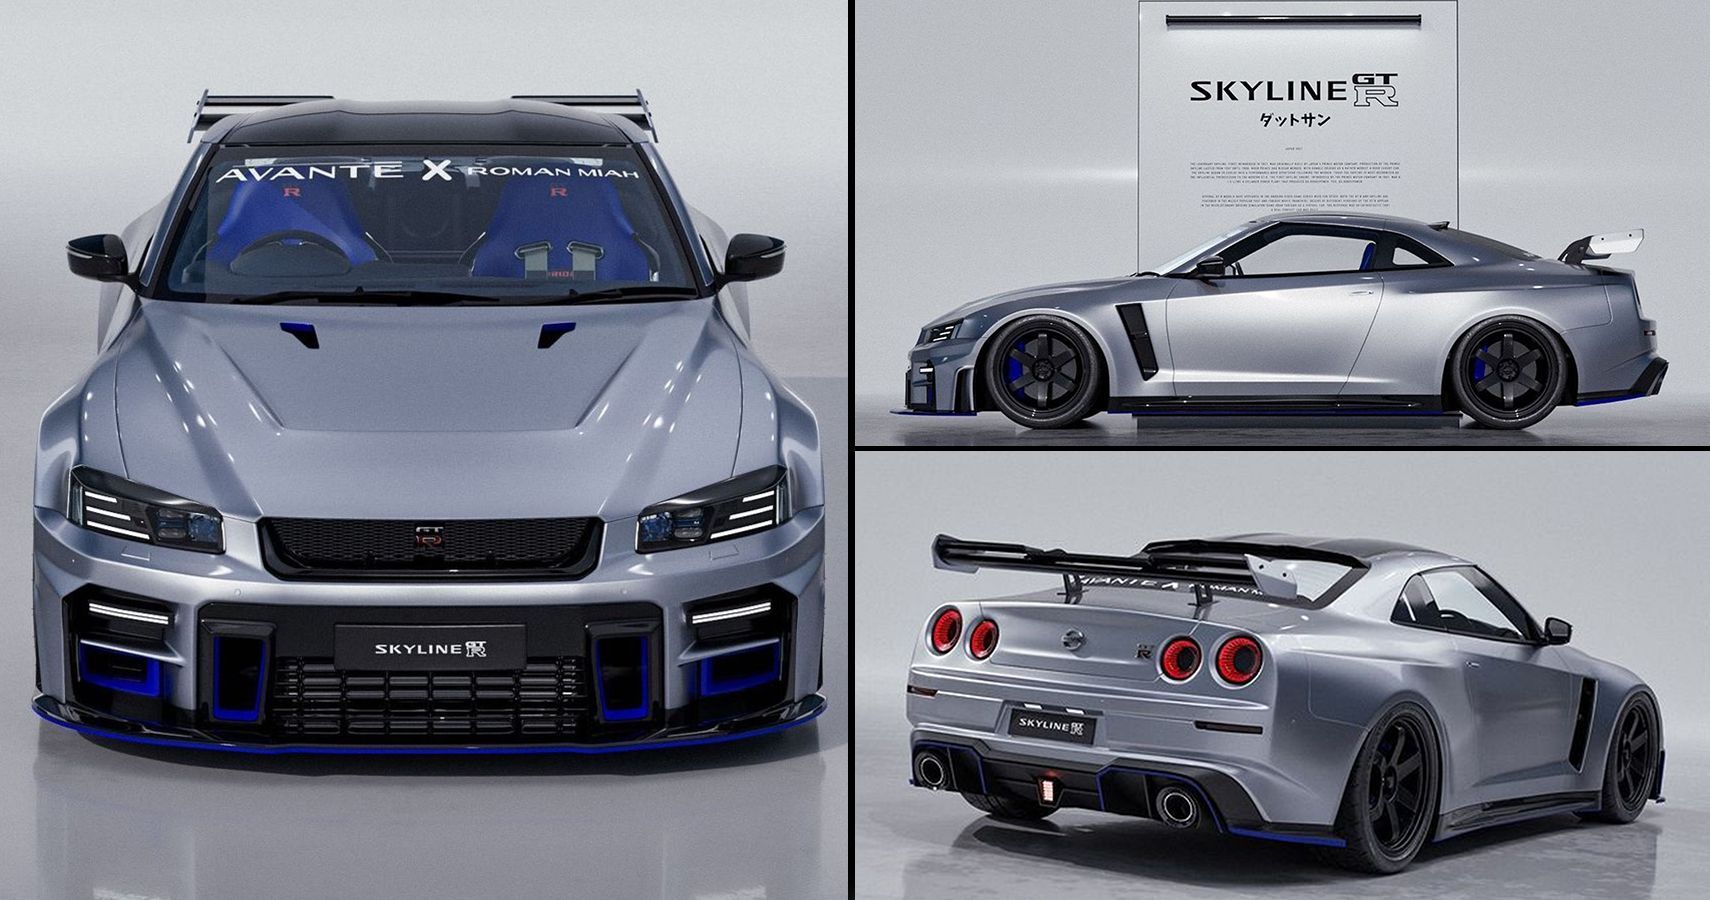 The idea behind this R36 Nissan Skyline GT-R concept was to